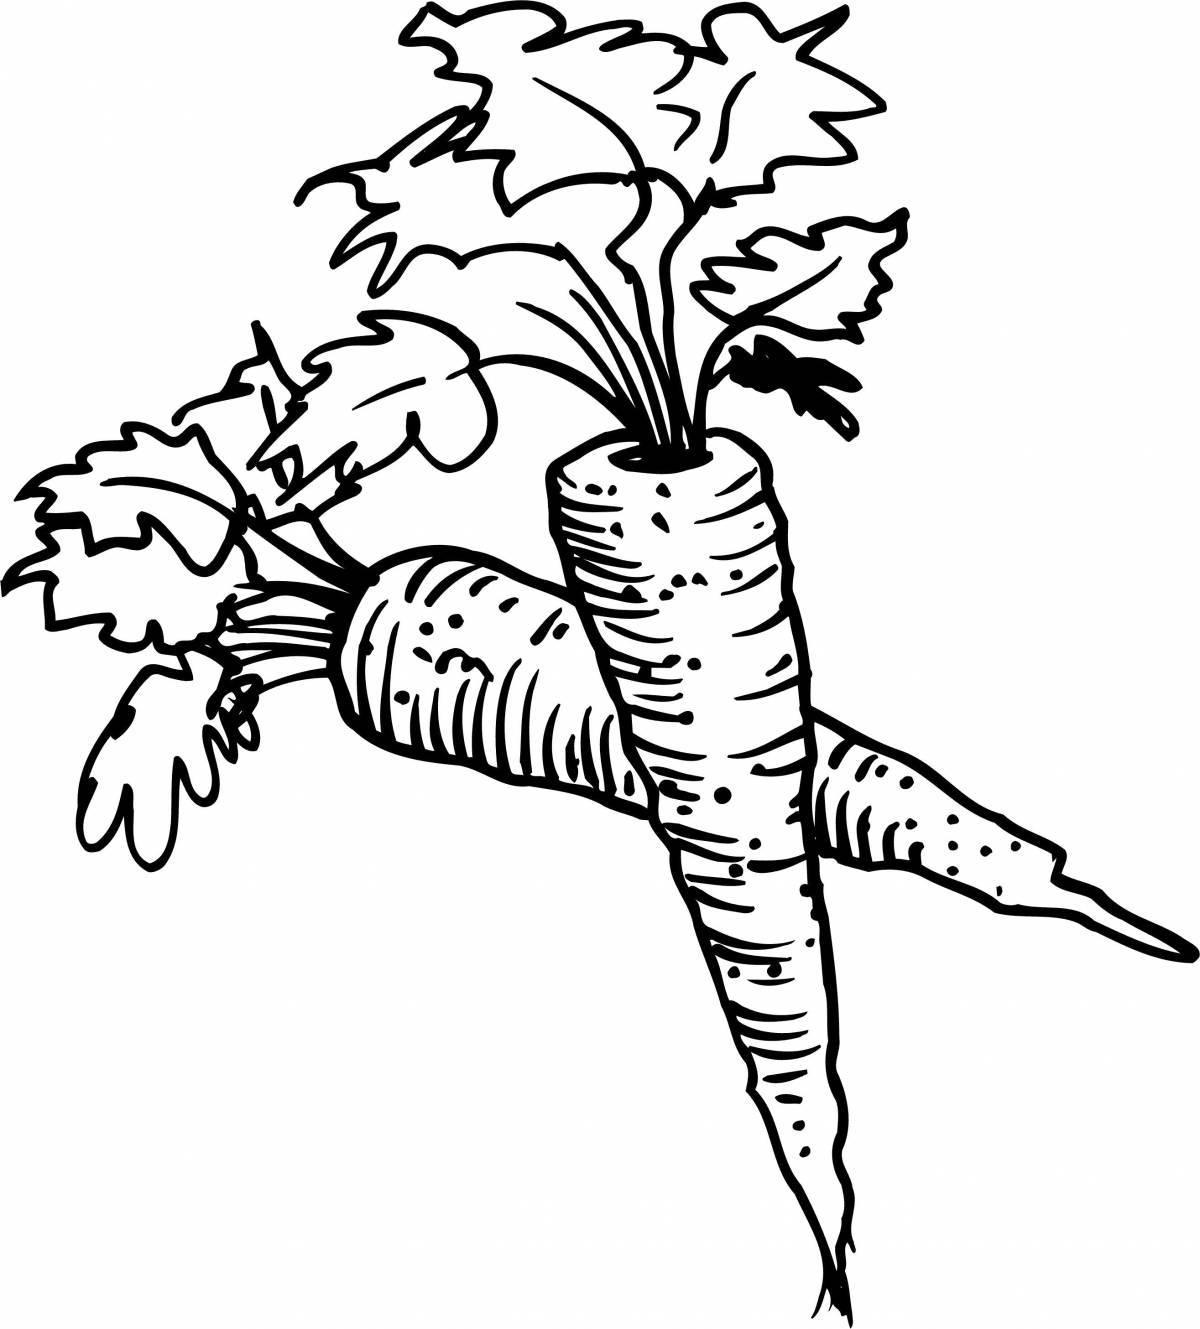 Glowing Carrot Coloring Page for Kids